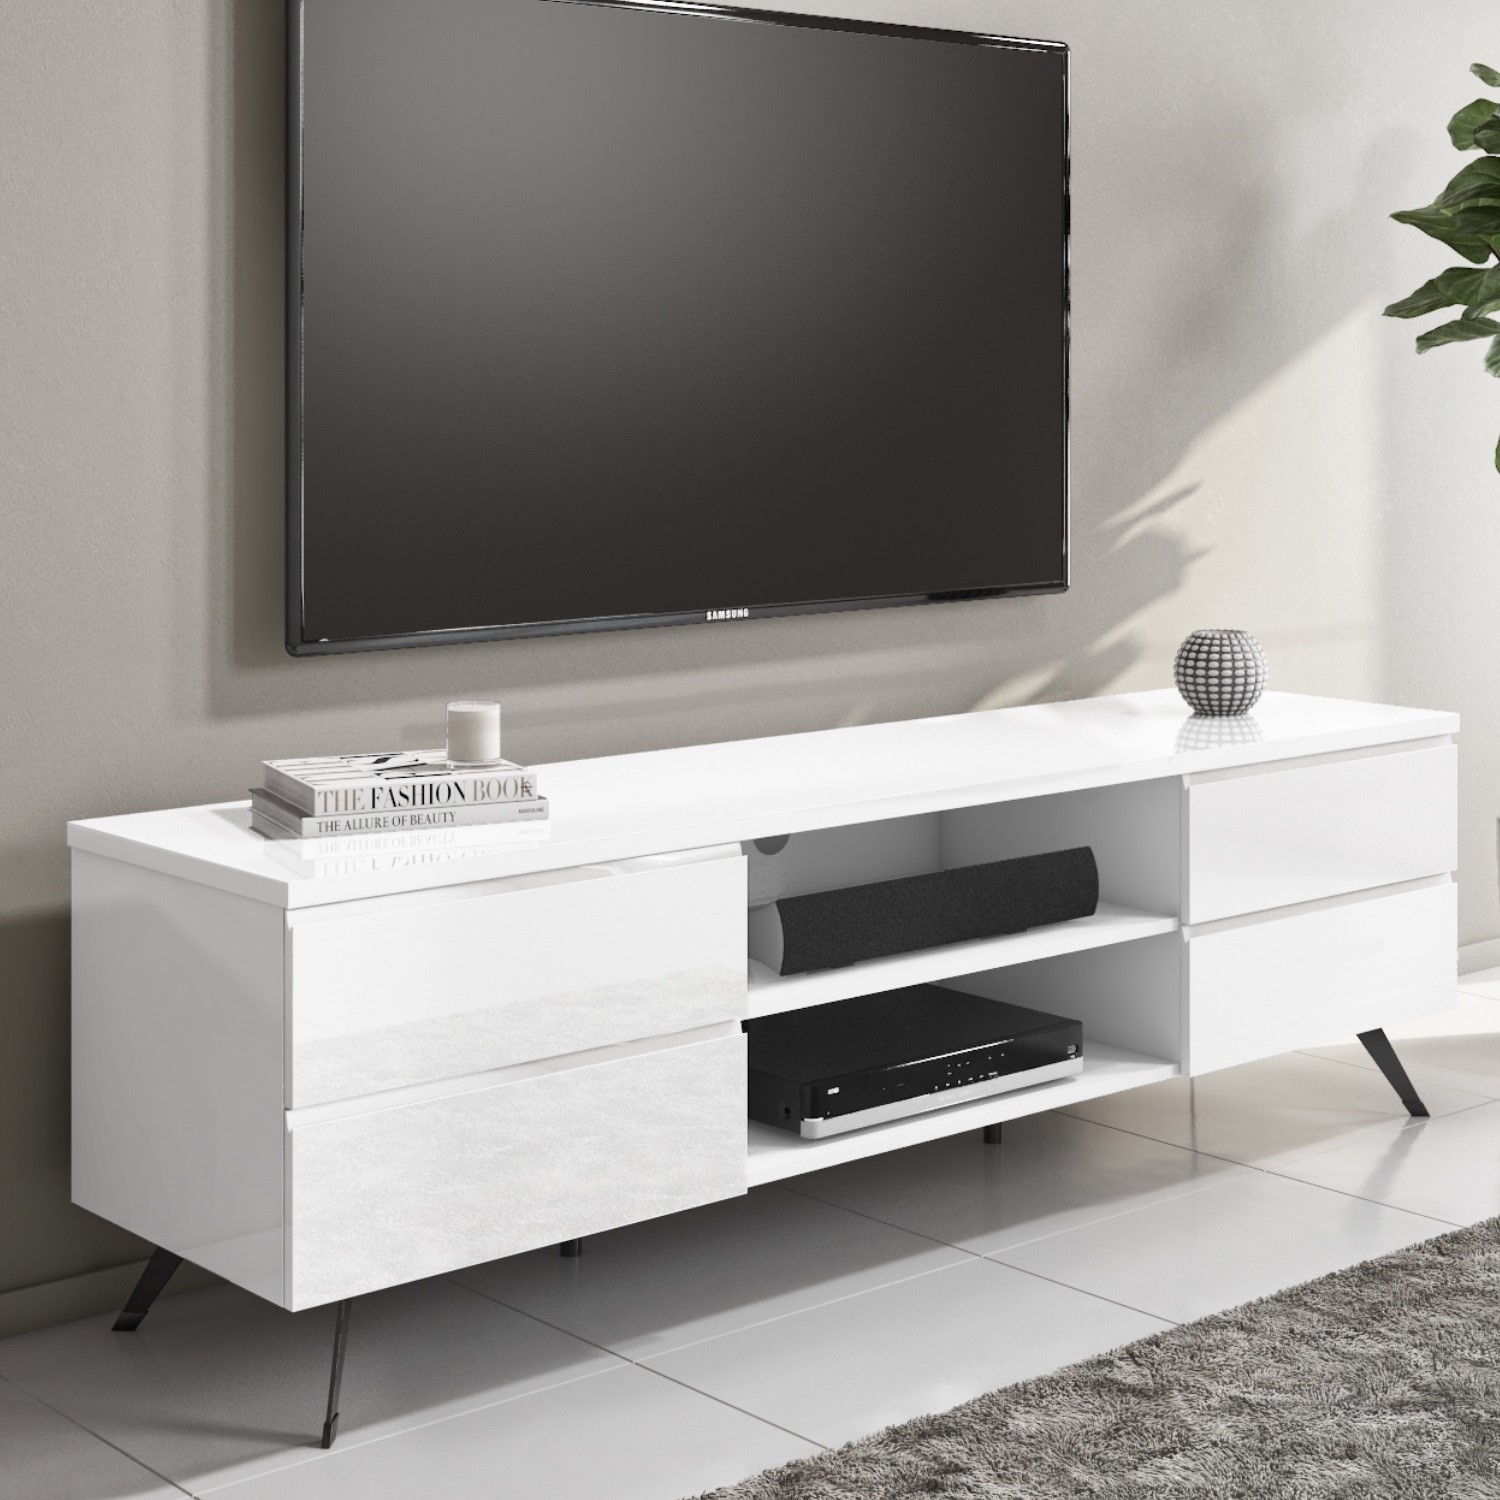 Read more about Wide white gloss tv stand with storage tvs up to 77 rochelle